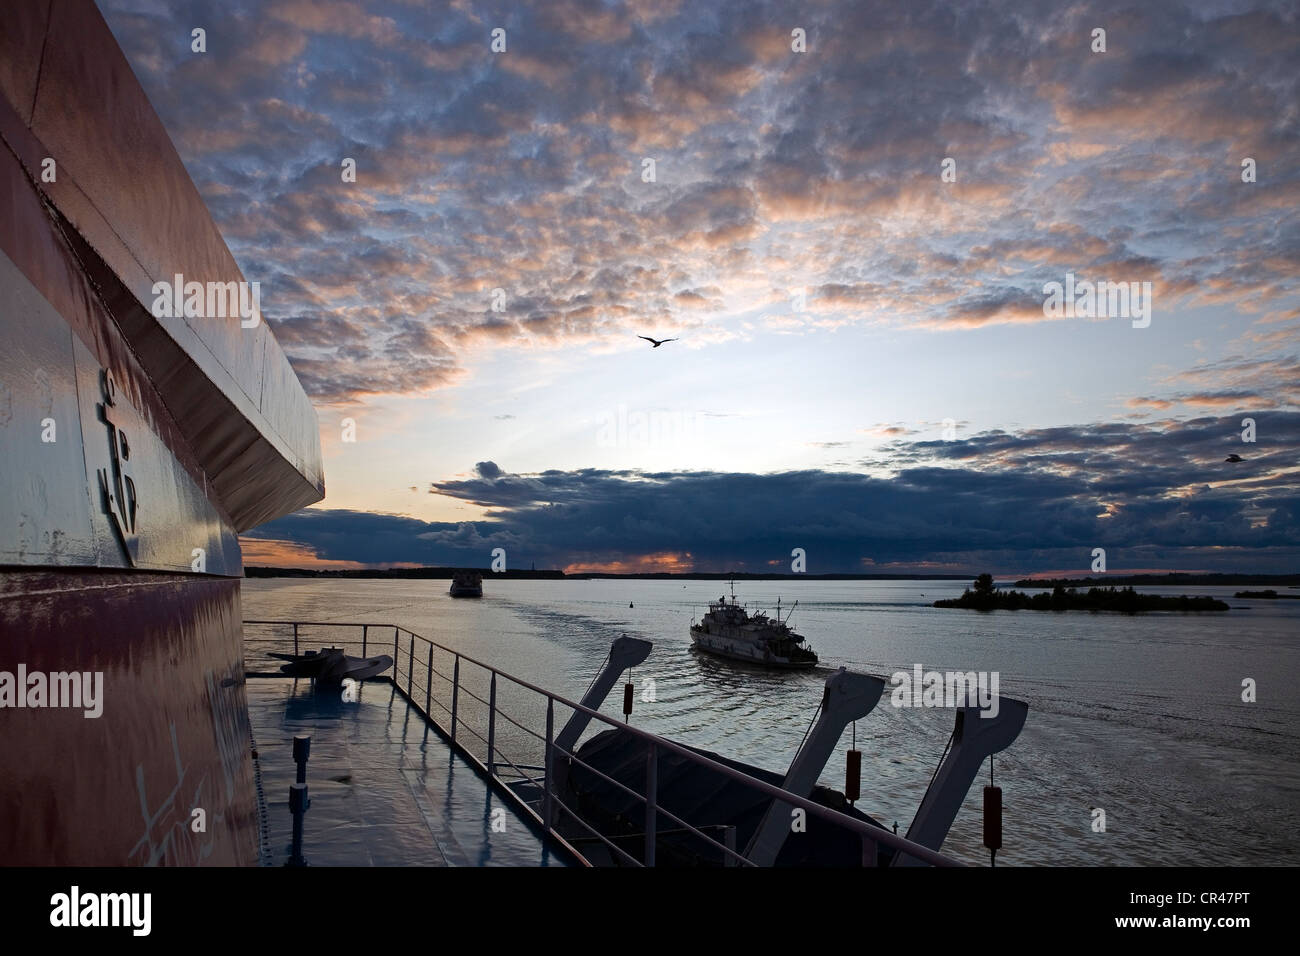 Russia, sunset on the Volga River from the upper deck of Leonid Sobolev cruise ship Stock Photo